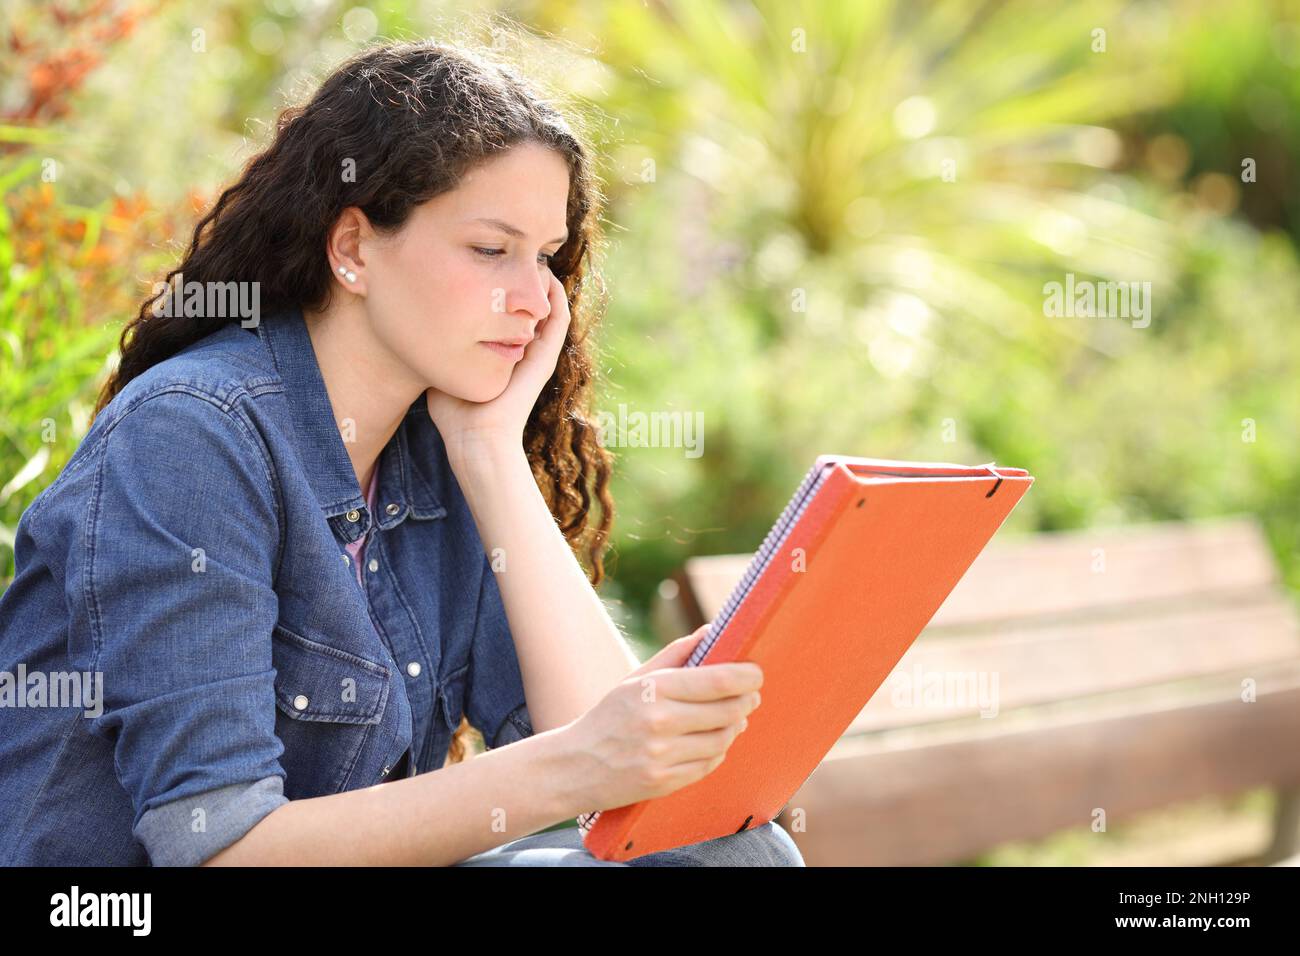 Student learning reading notes sitting in a bench in a park Stock Photo